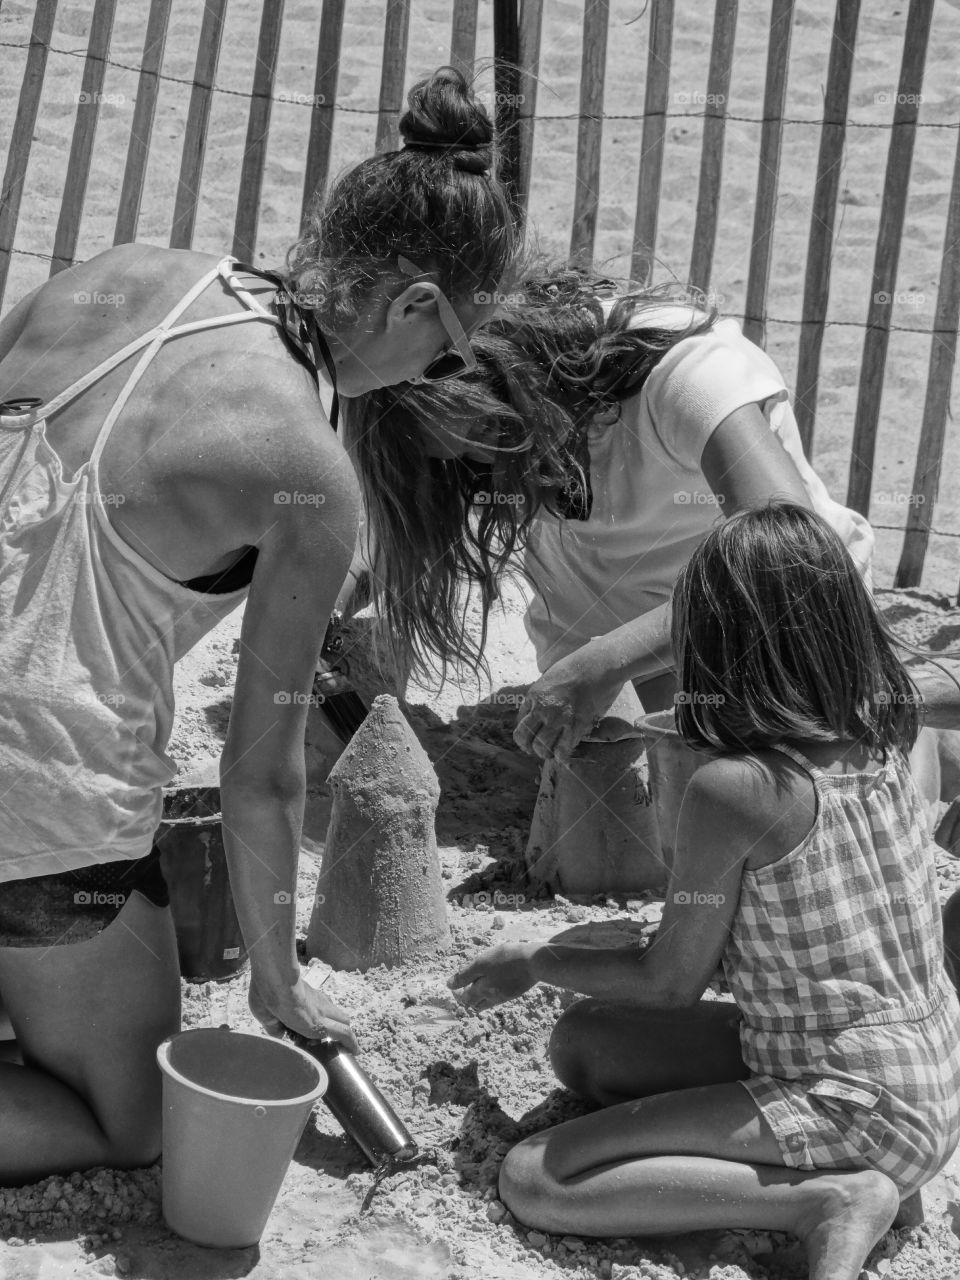 sand castle lessons. Teaching the younger ones to build sandcastles during the 2014 Hampton Beach sand sculpture event.